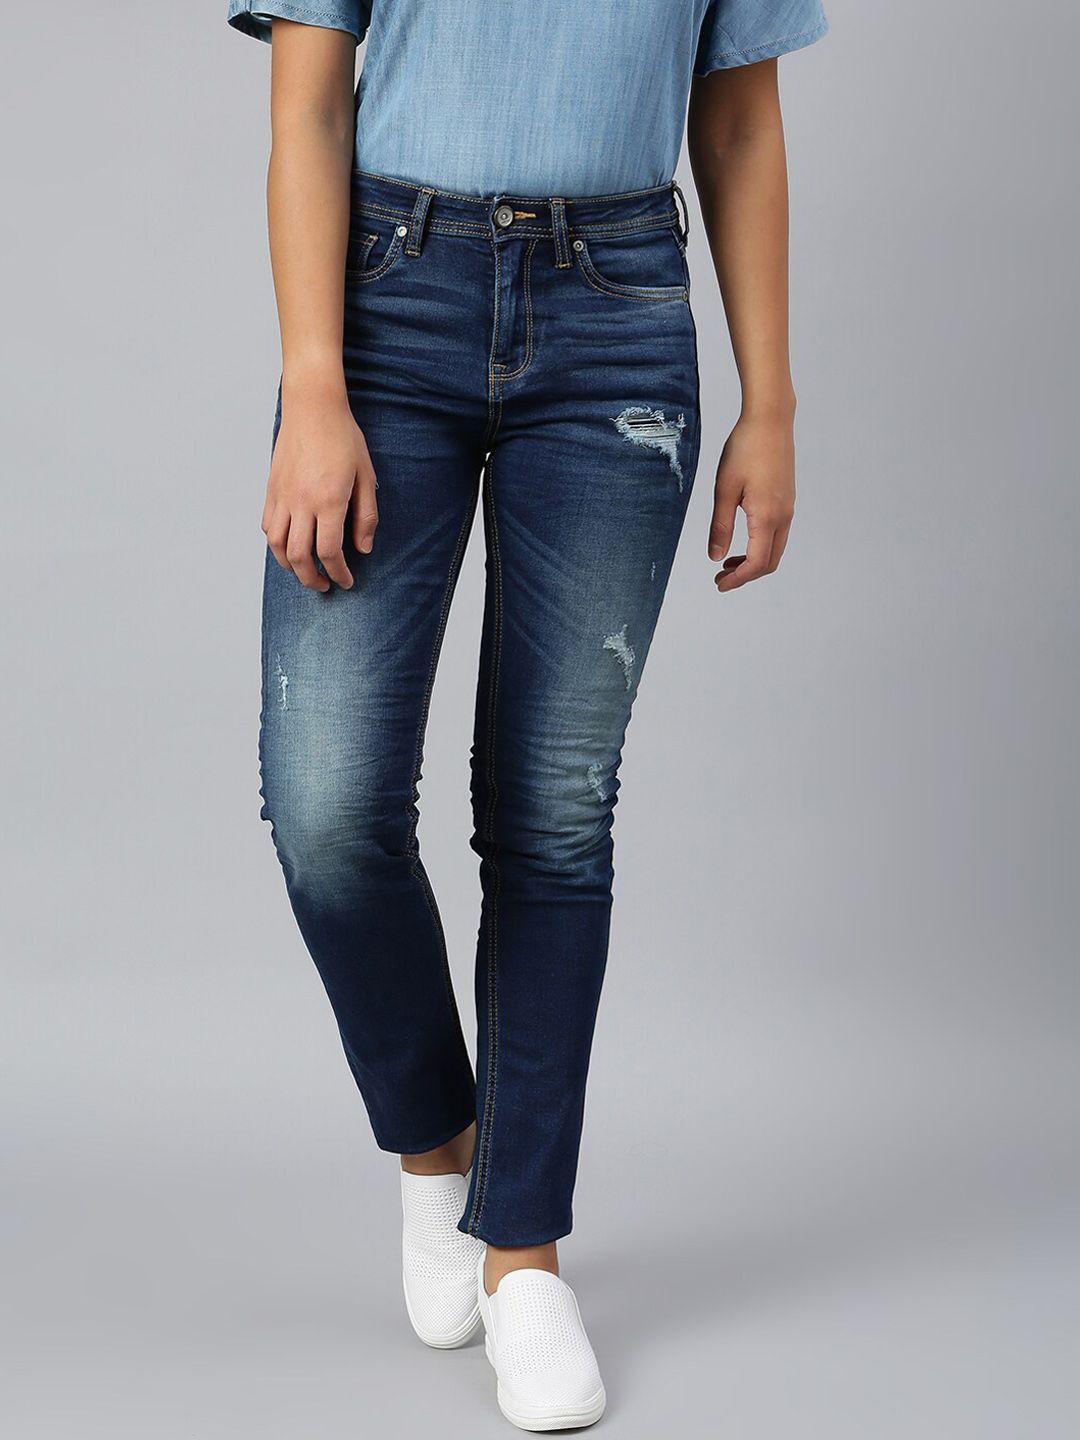 woodland women blue mildly distressed light fade stretchable jeans